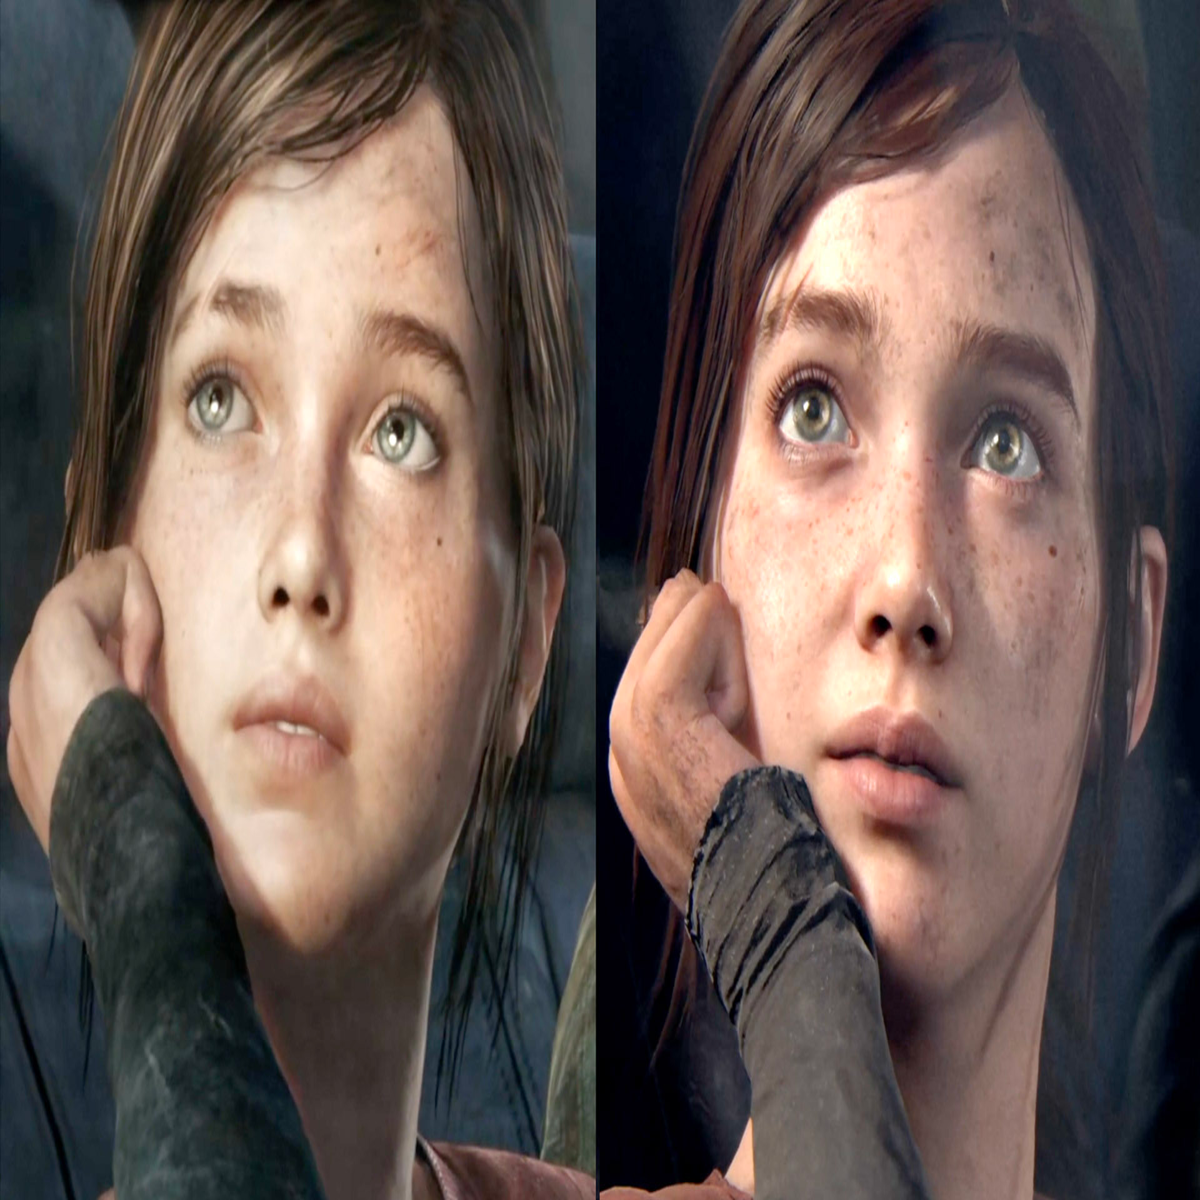 Gallery: Here's how The Last of Us remake looks compared to PS4